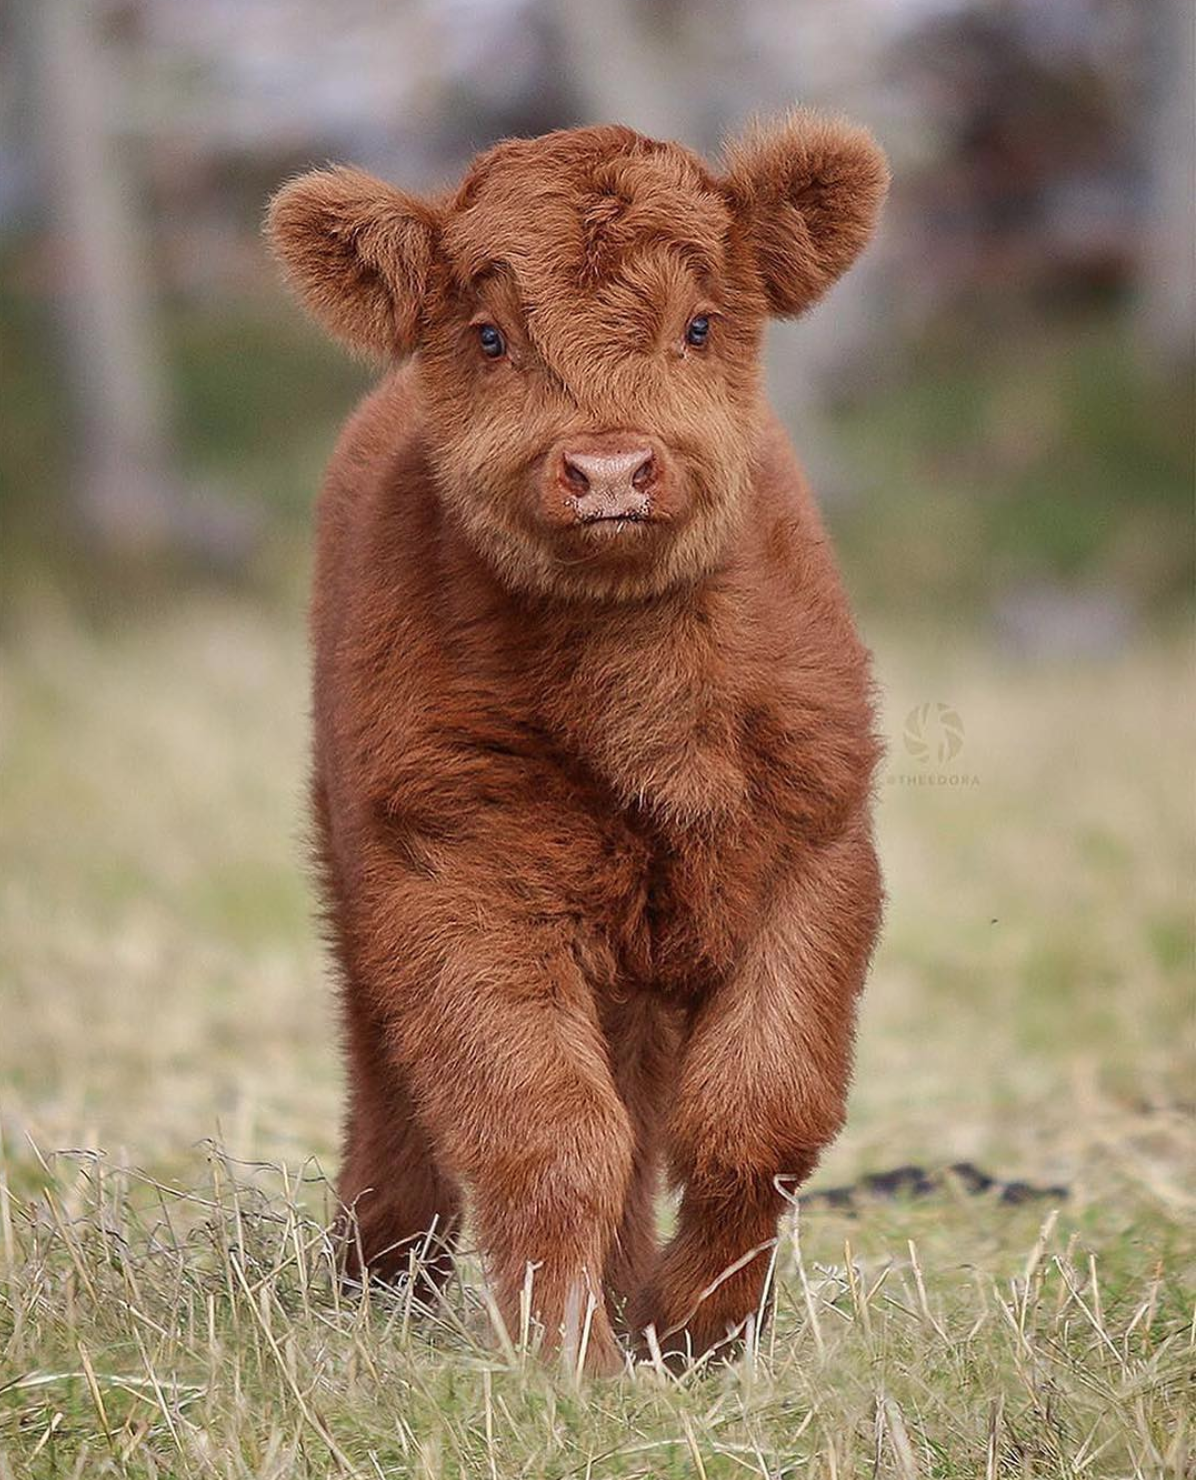 Fuzzy Highland Baby Cow